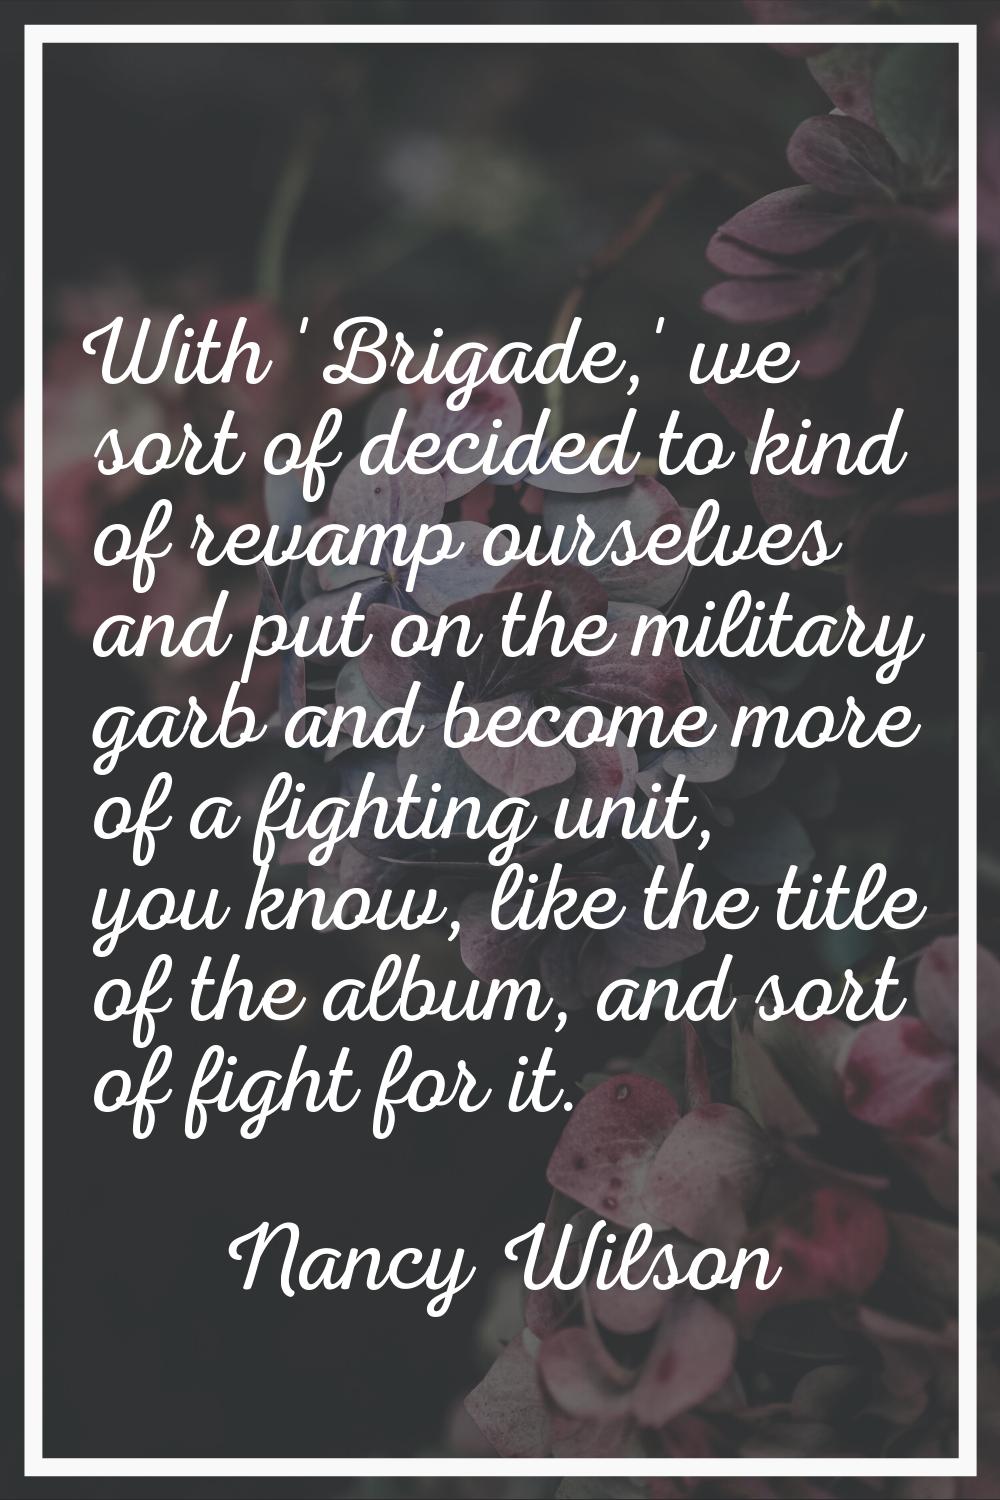 With 'Brigade,' we sort of decided to kind of revamp ourselves and put on the military garb and bec